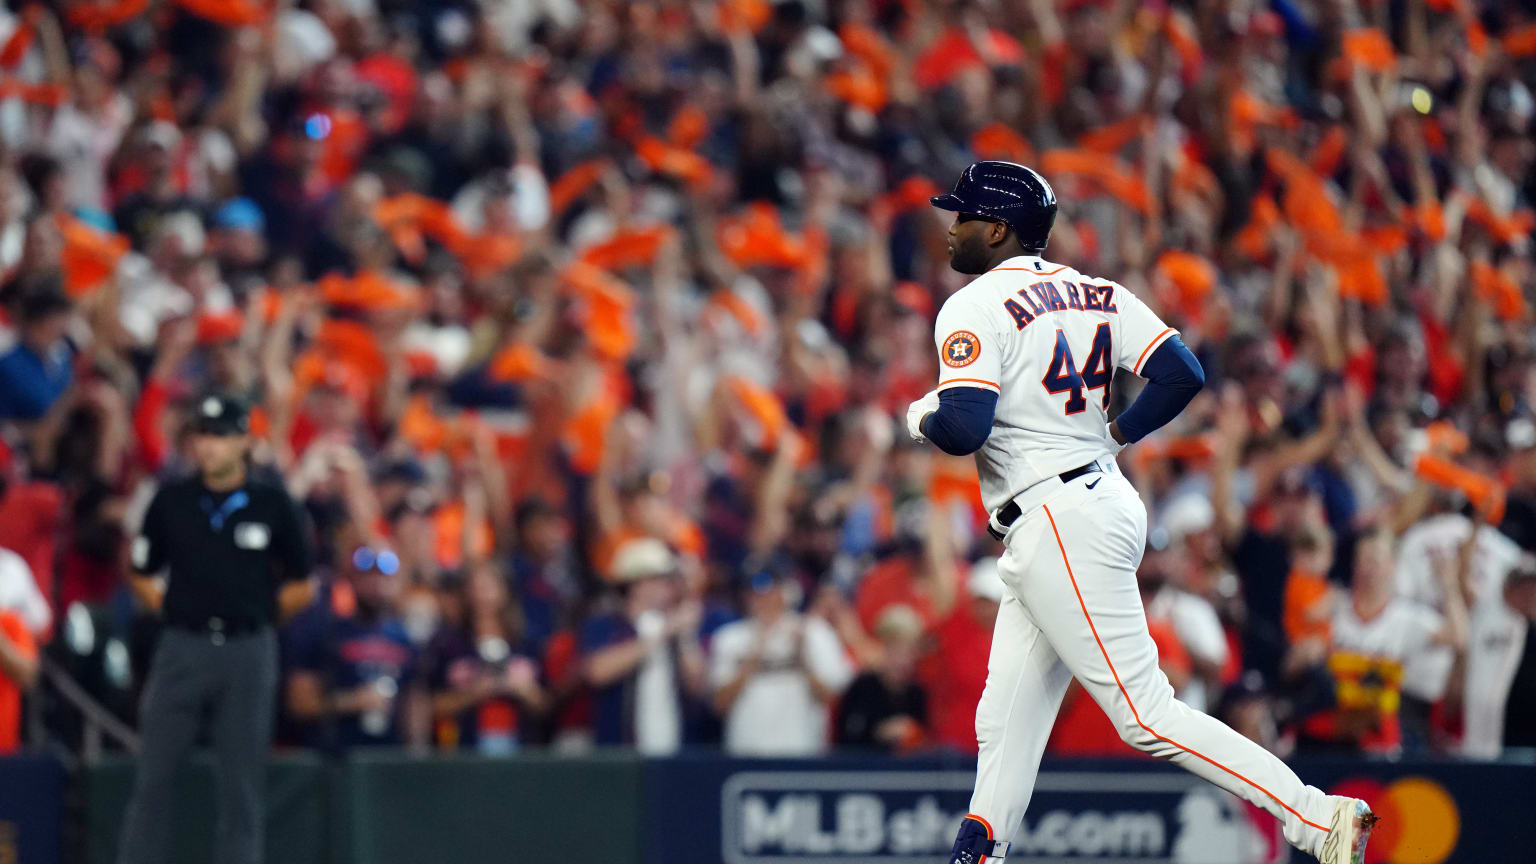 Astros fans receive Yordan Alvarez jersey and take photos with World Series  trophy